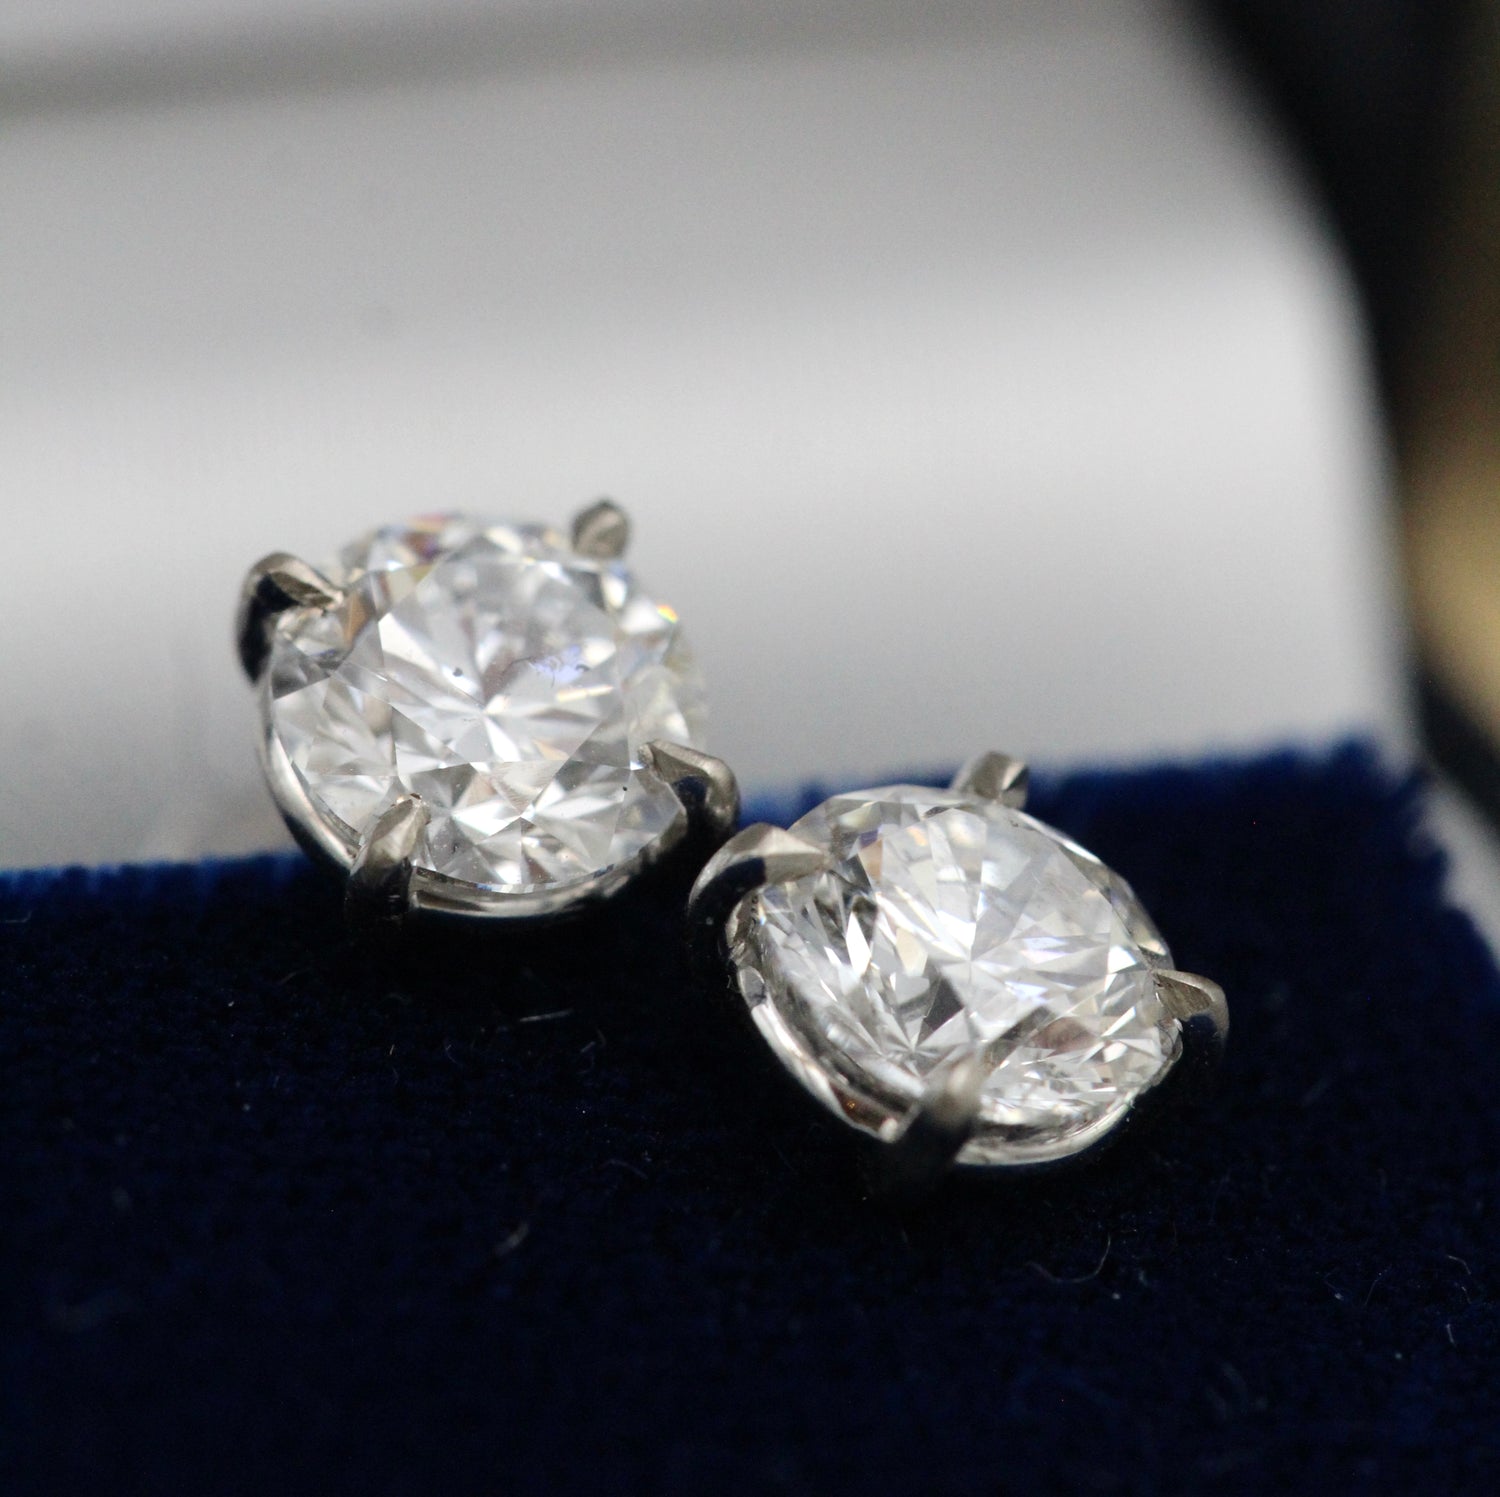 A fine pair of 18 Carat White Gold (Stamped) Diamond Earrings, two Round Brilliant Cut Diamonds of 3.03 Carats, G Colour & SI2 Clarity Pre-owned - Robin Haydock Antiques